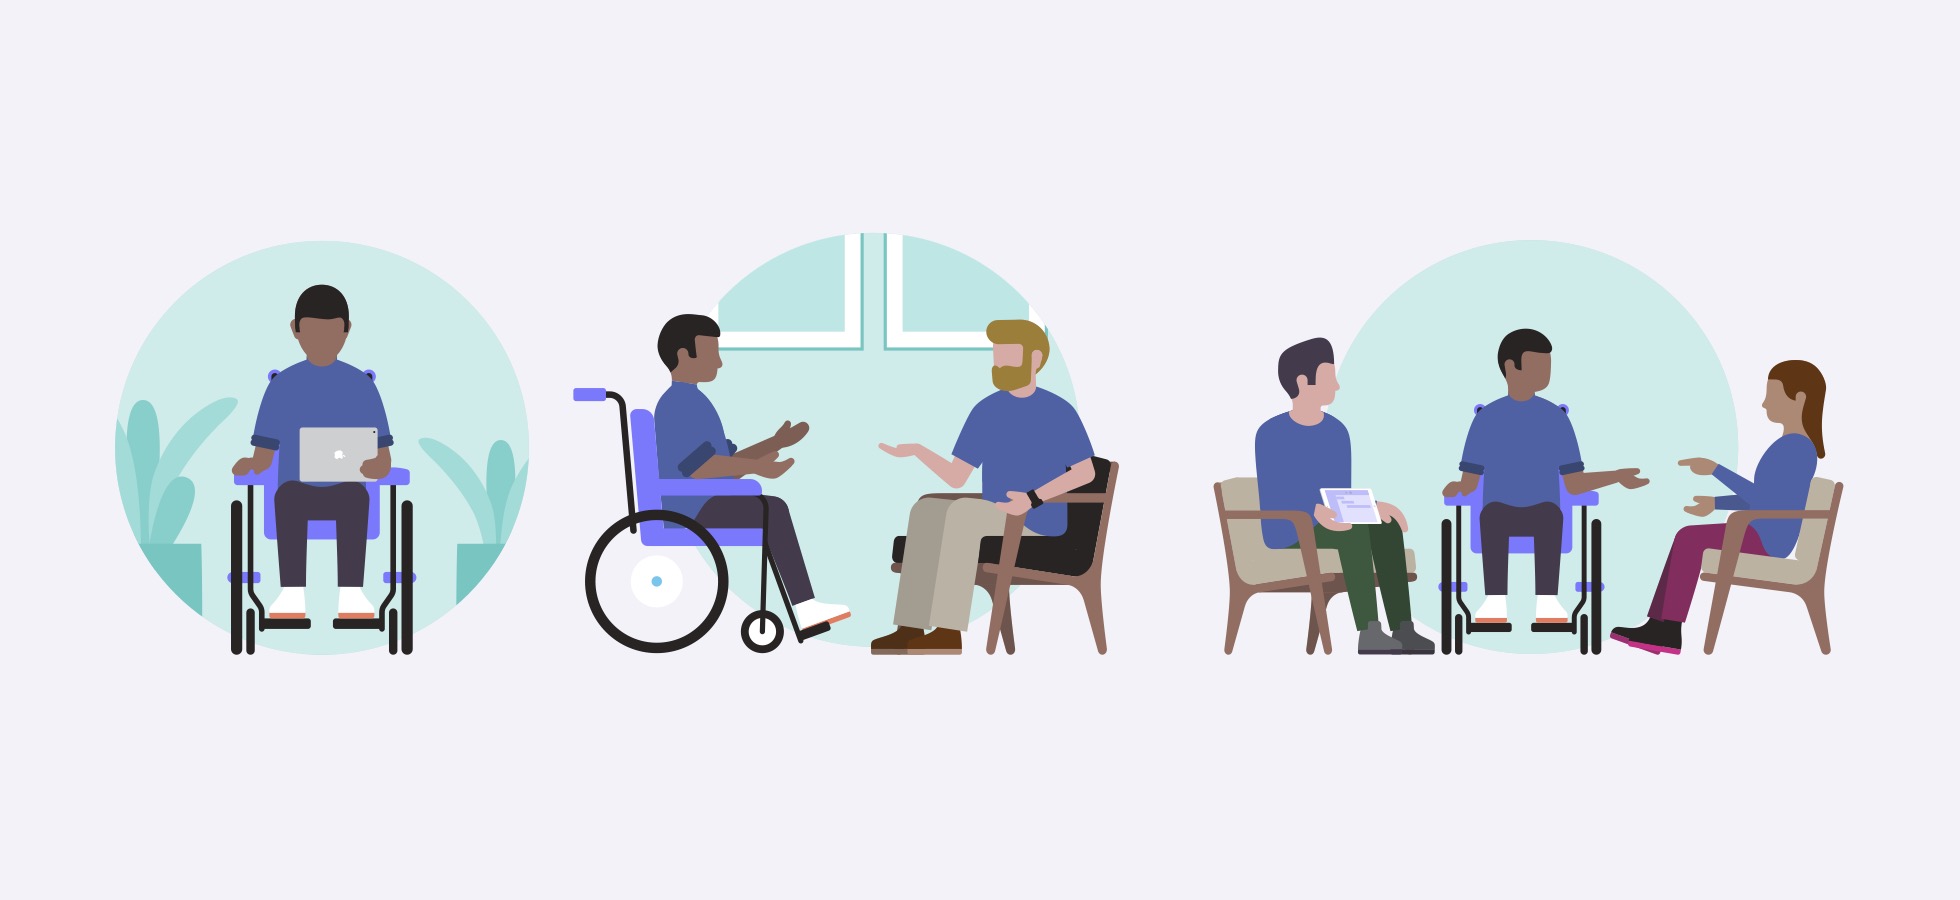 A coach seated in a wheelchair, in 3 scenarios: working alone on iPad, with 1 other coach, and in a group with 2 coaches.